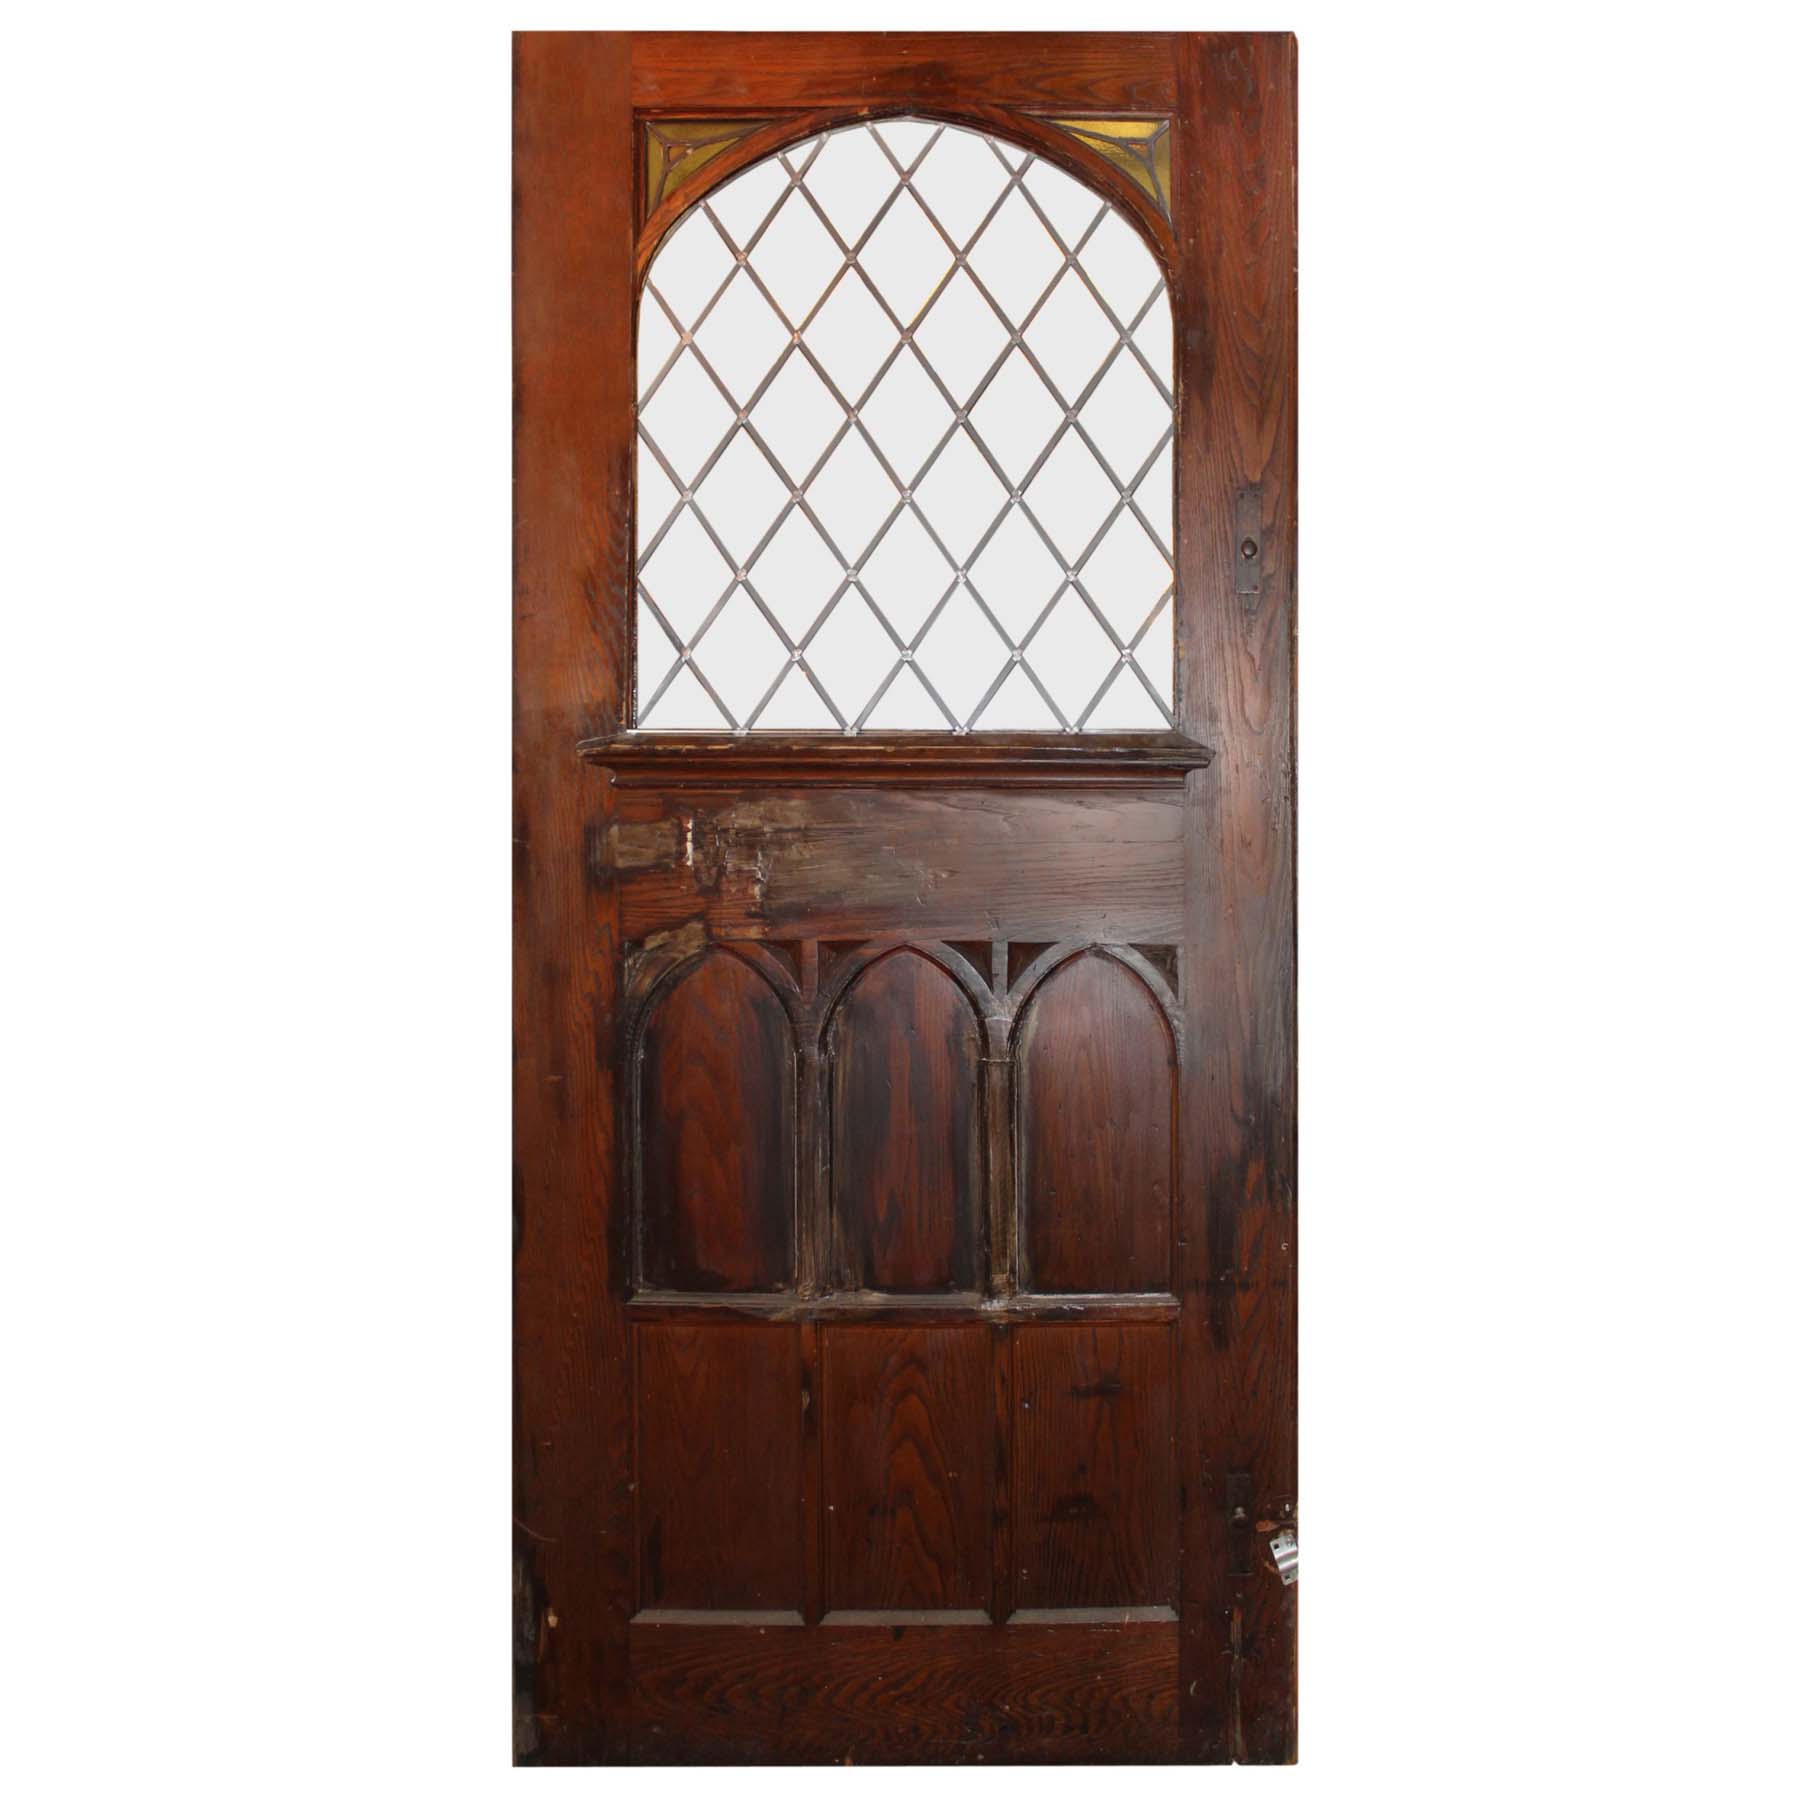 Large 48” Salvaged Oak Door with Gothic Arch Window-0